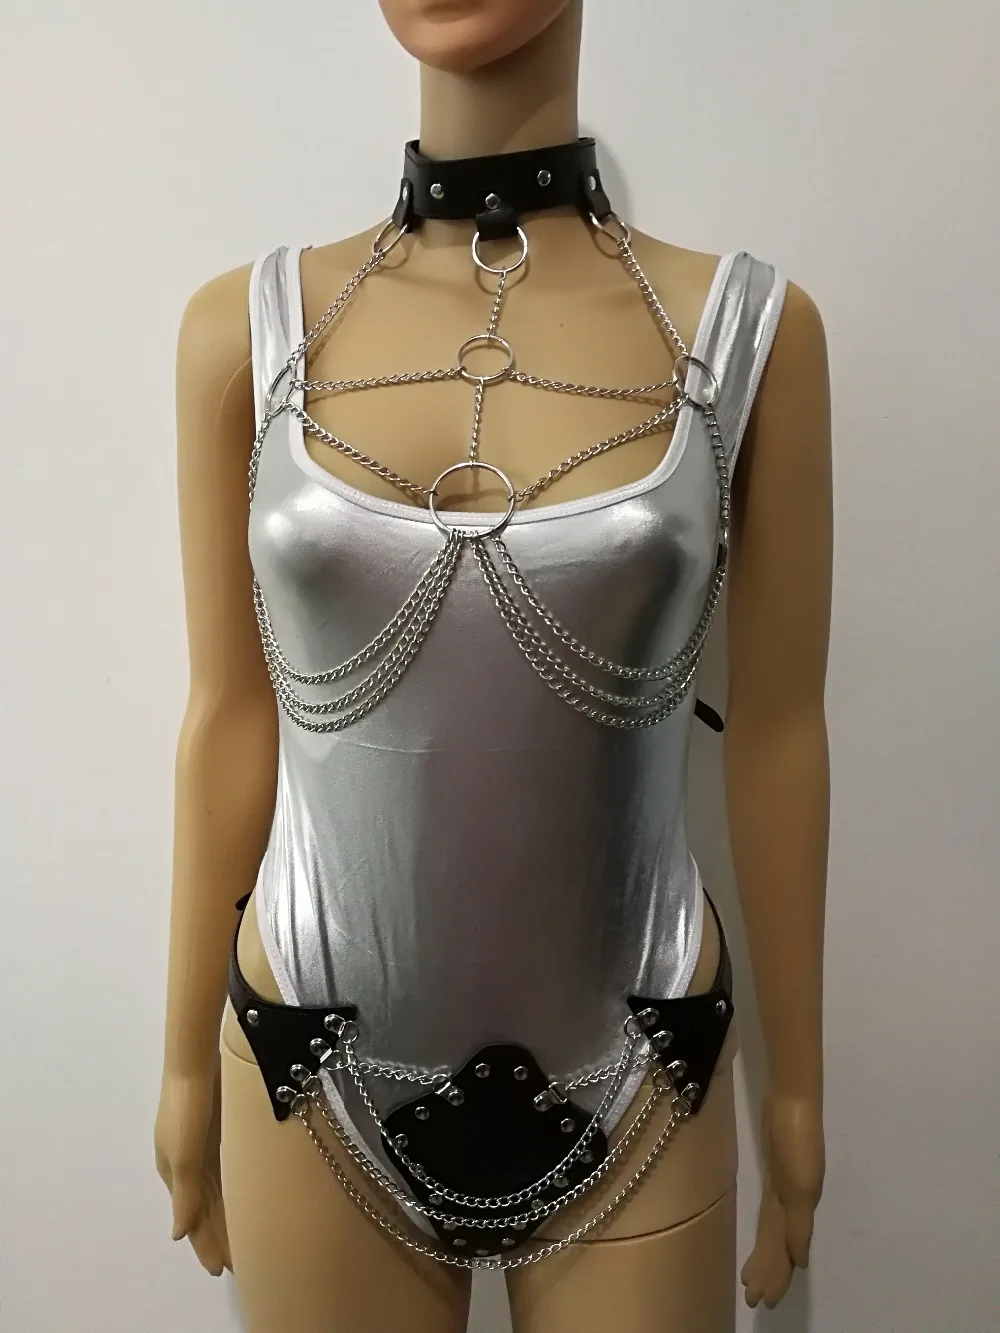 Buy New Fashion Leather Style Wrb940 Leather Harness